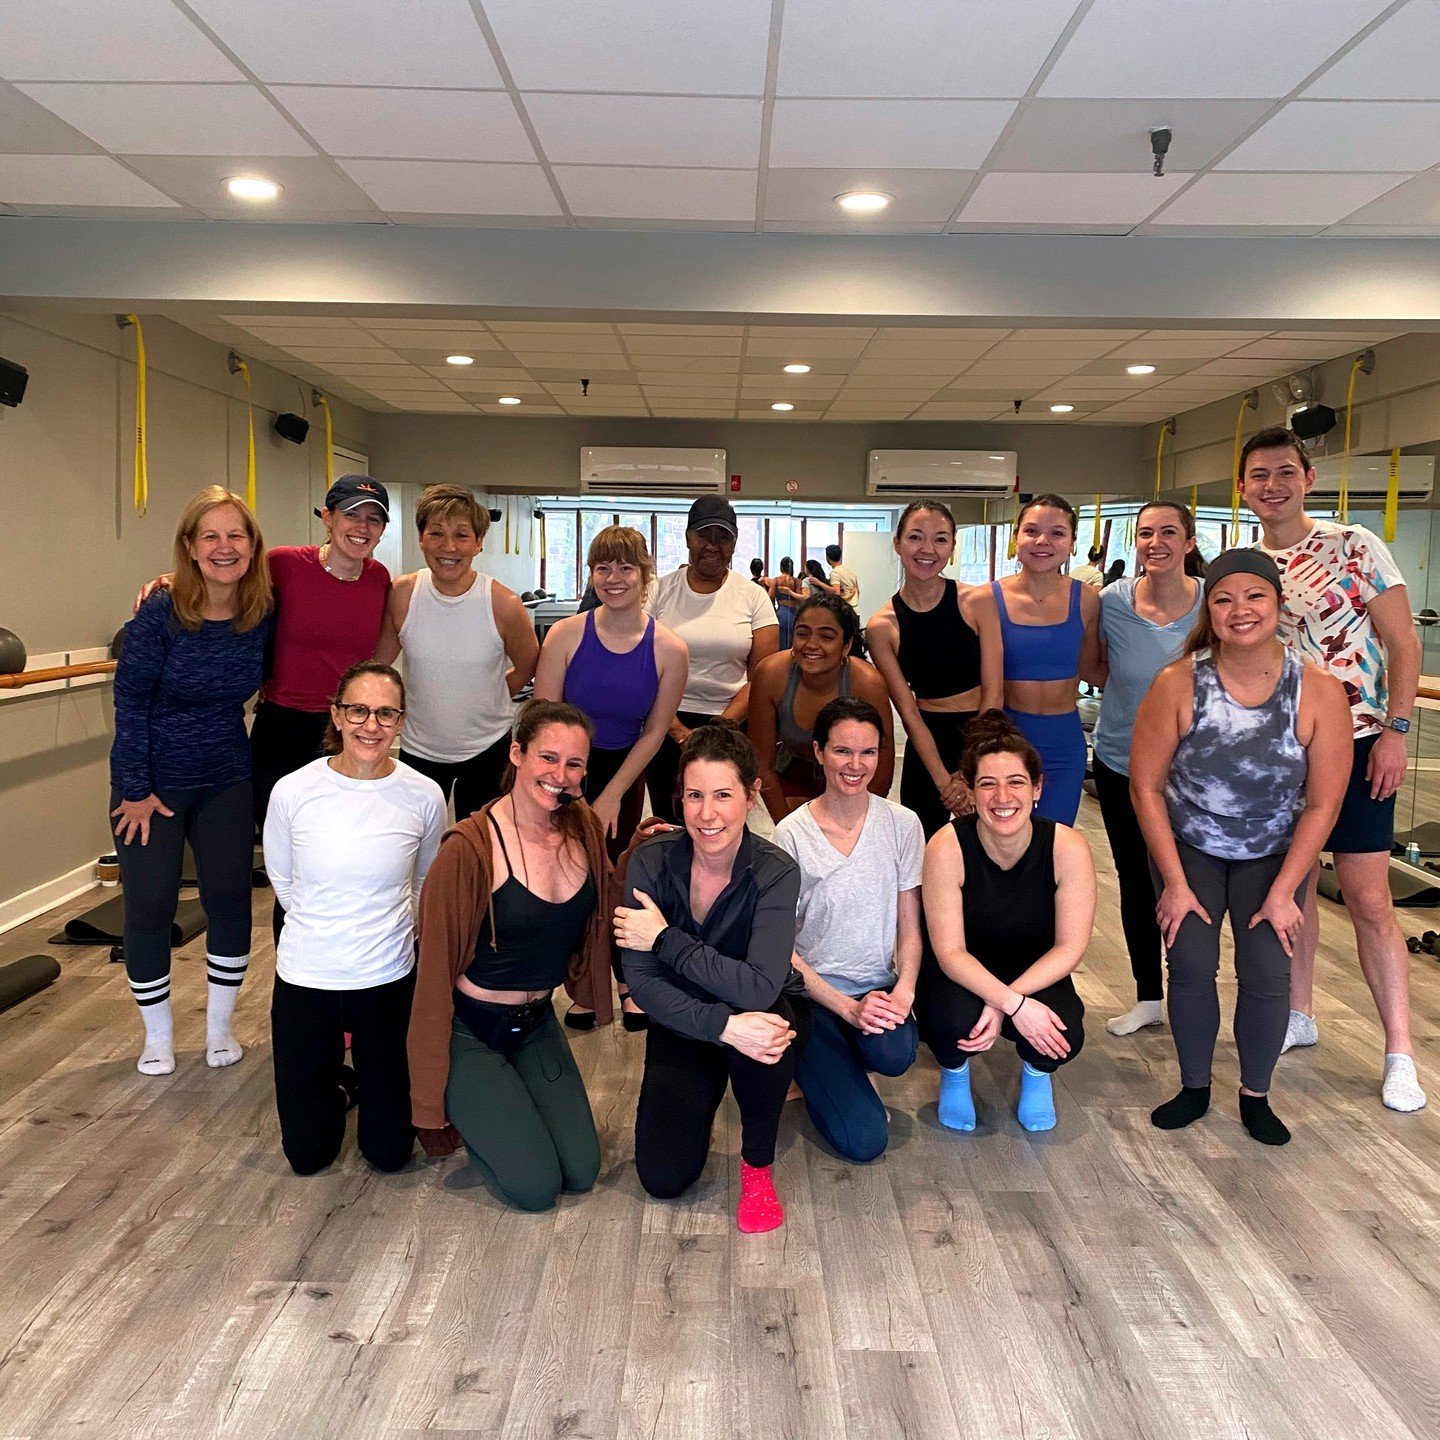 #TBT to our charity class for @foodbank4nyc -- we loved all of the energy and exuberance in the room on Saturday!!! 

Thank you so much for joining us! 💗 💗 💗